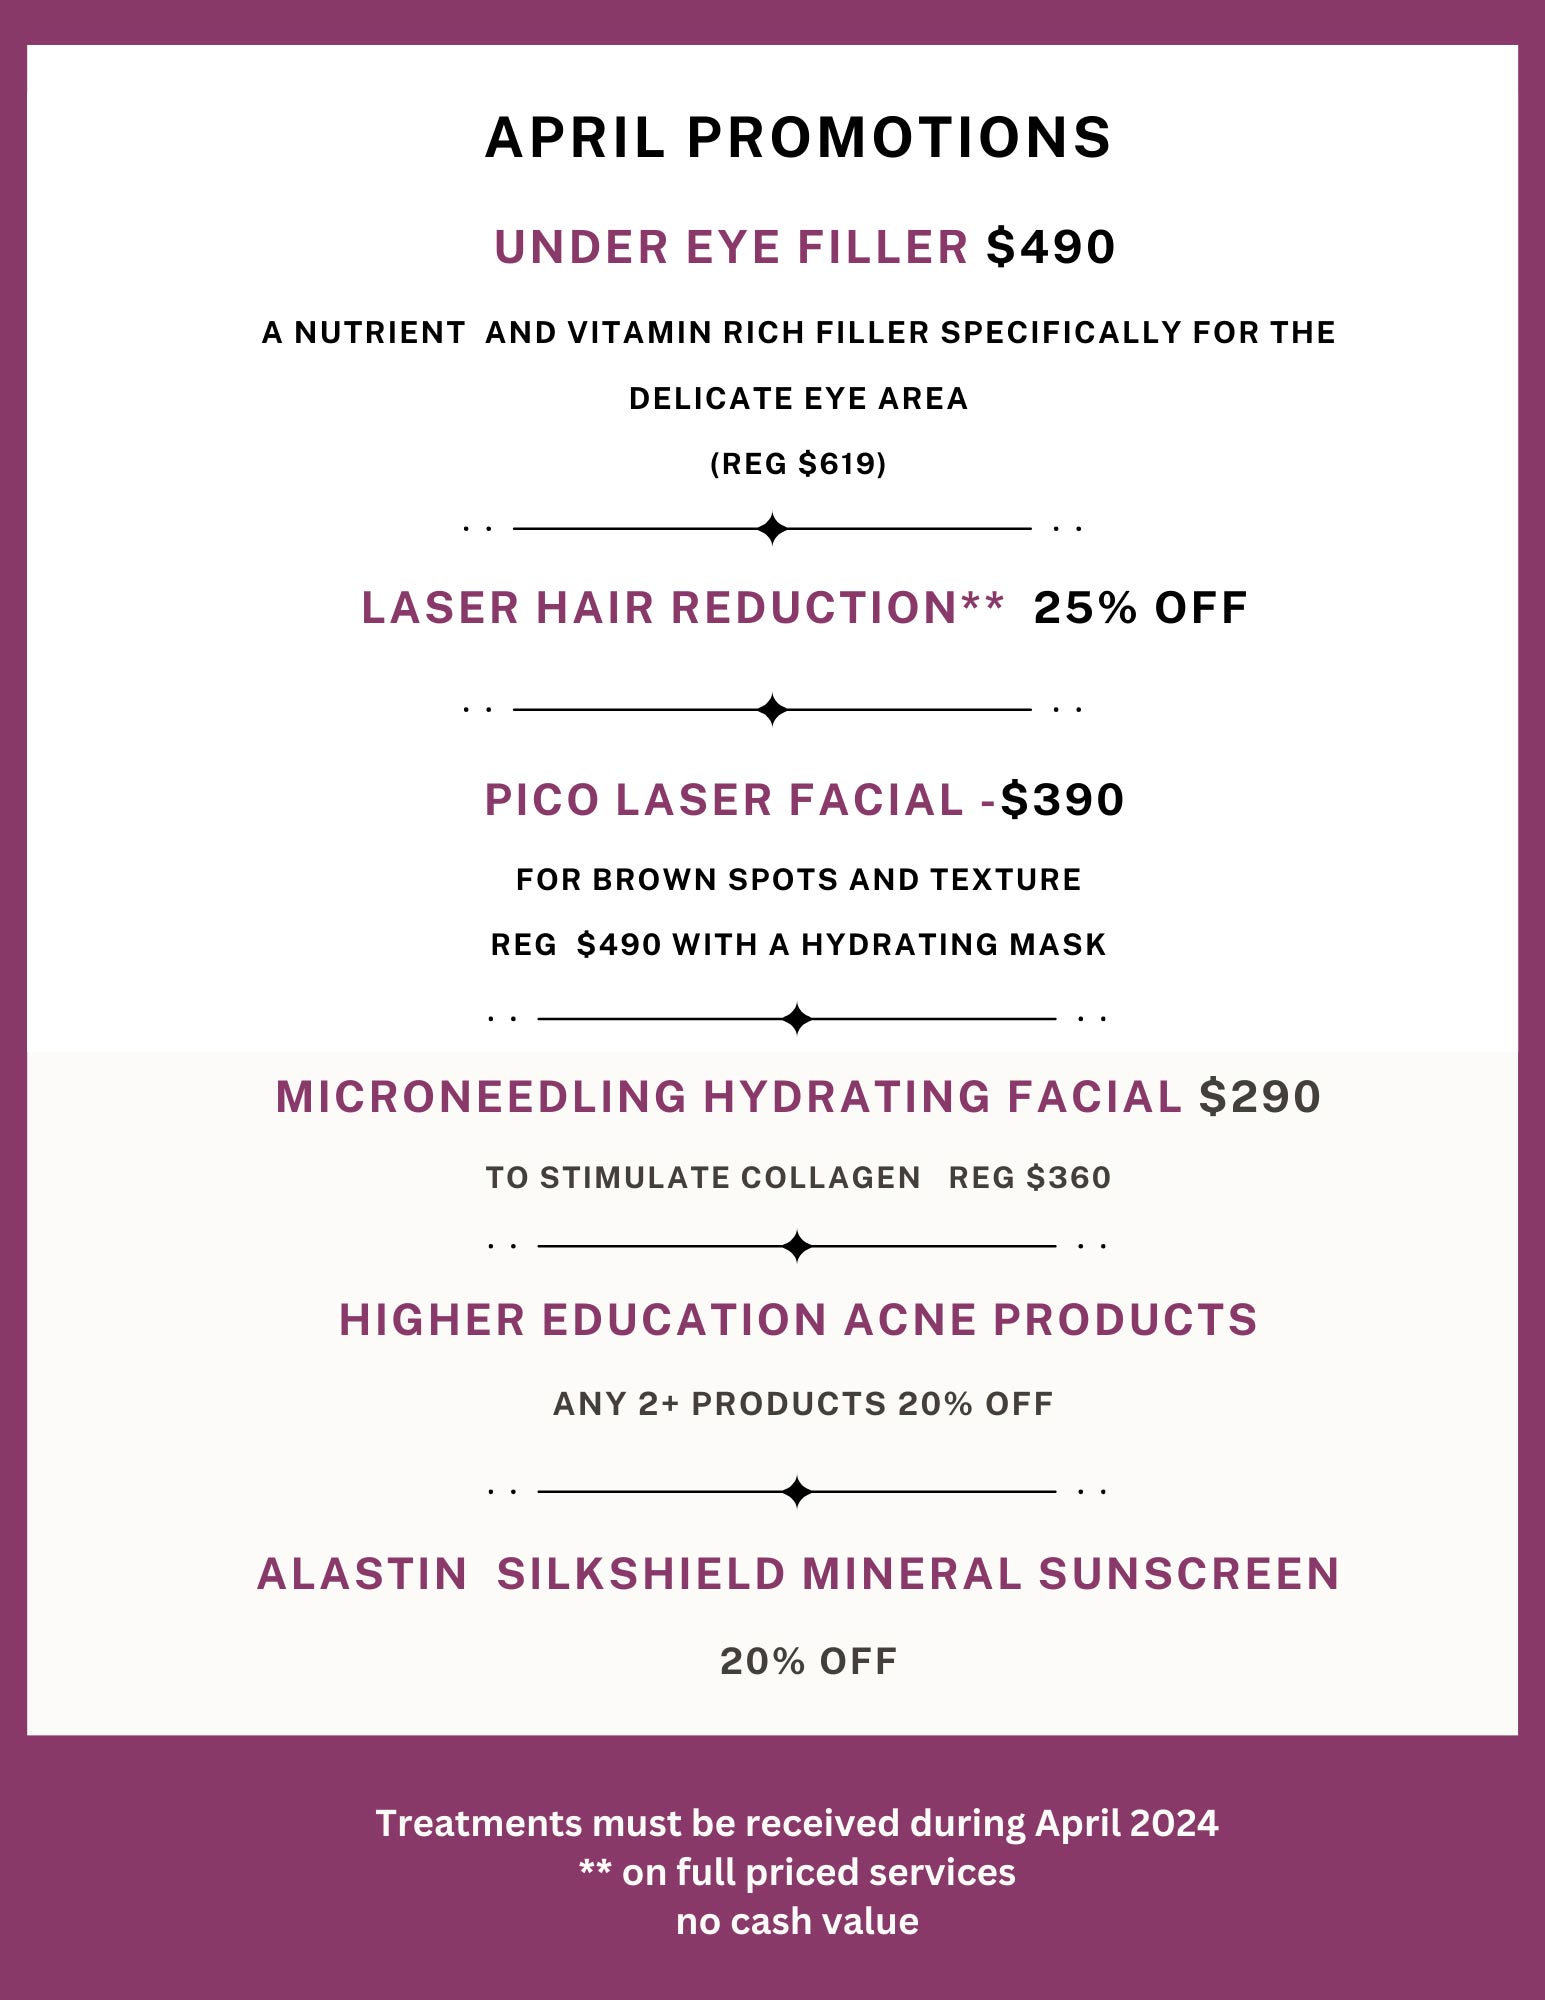 April Special Offers at Clarite:
                 1. Under Eye Filler $490.00, Regular $619.00.  This is a nutrient and vitamin rich filler specifically for
                 the delicate areas around the eyes.
                 2. Laser Hair Reduction 25% off.
                 3. Pico Laser facial $390.00, regular $490.00. For brown spots and texture, with a hydrating mask.
                 4. Microneedling hydrating facial $290.00, regular $360.00. To stimulate collagen production.
                 5. Higher Education acne products: Purchase two or more and get 20% off.
                 6. Alastin Silkshield mineral sunscreen: 20% off.
                 Plus, visit us for in-clinic only special offers! All services from these April specials must be received during April, 2024.